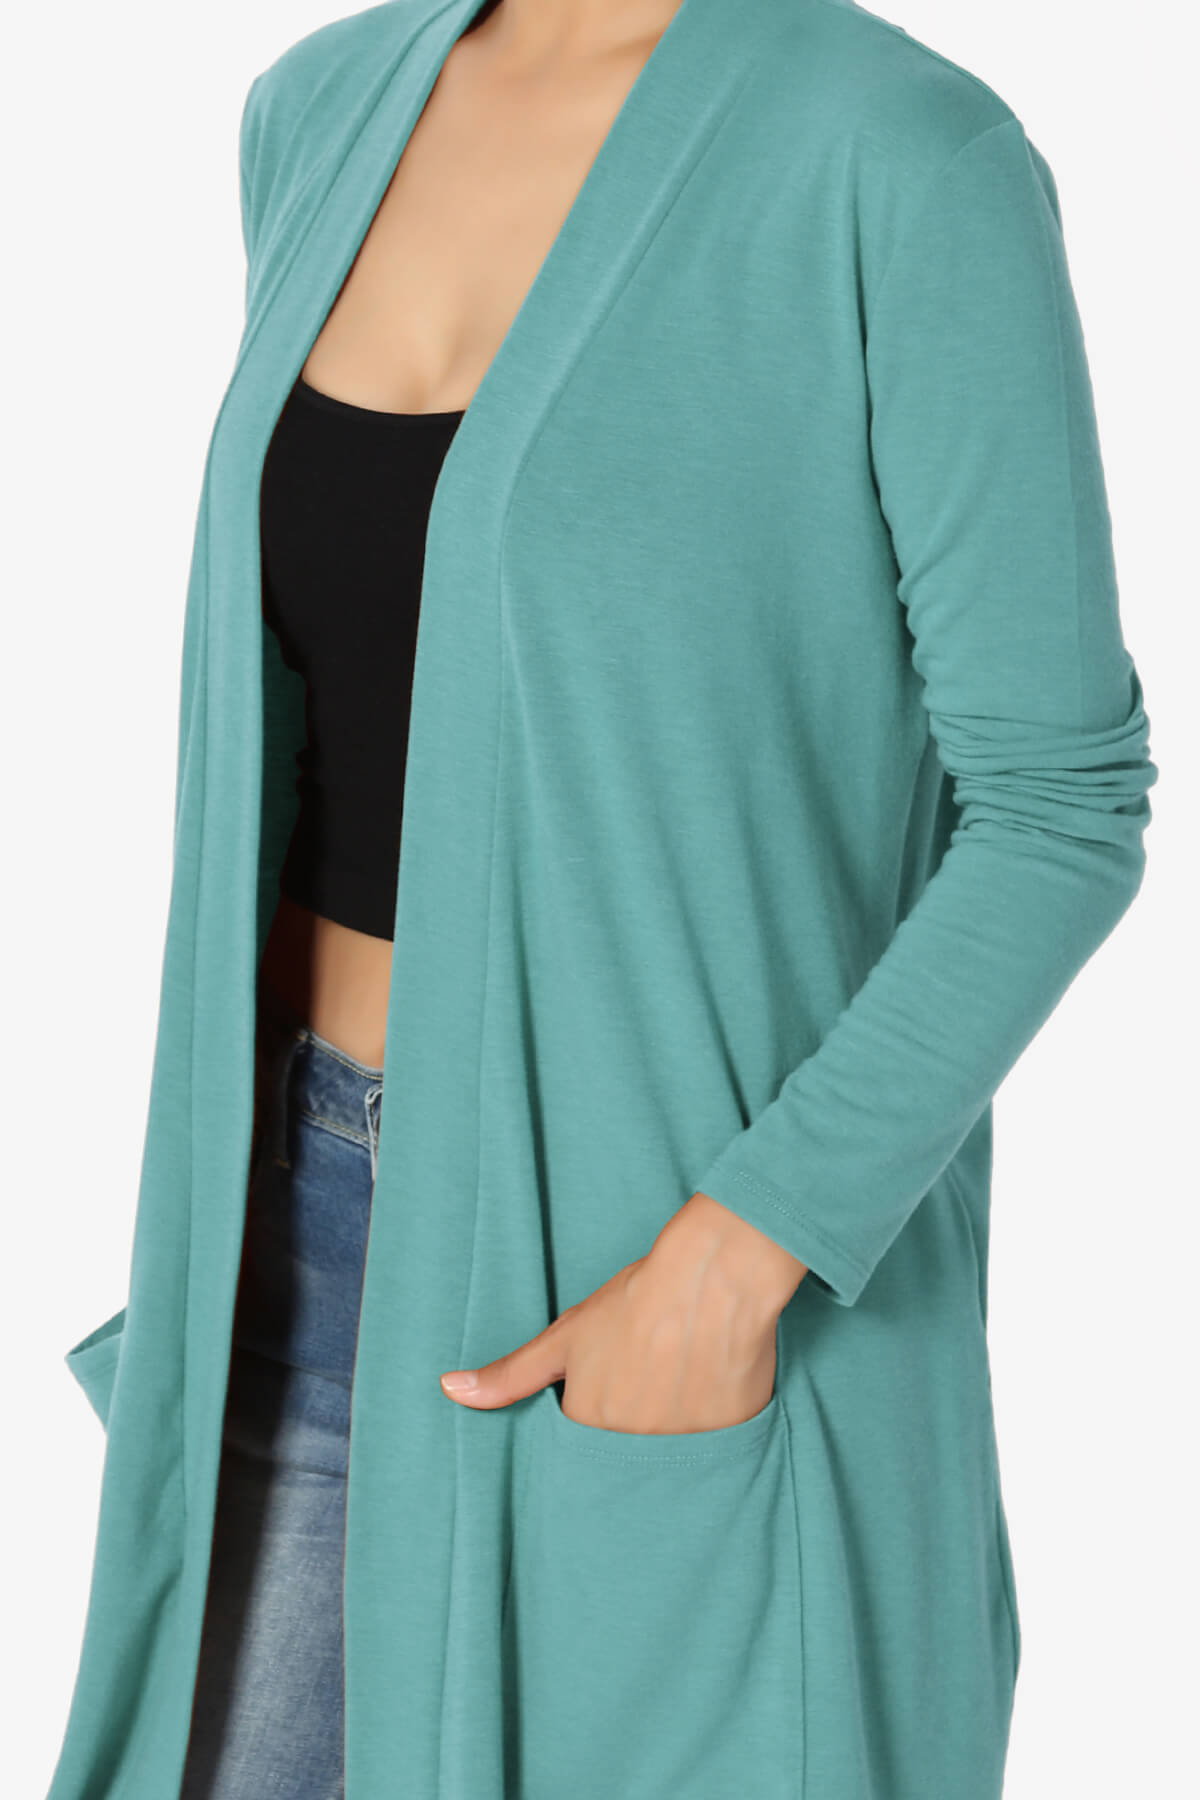 Daday Long Sleeve Pocket Open Front Cardigan DUSTY TEAL_5